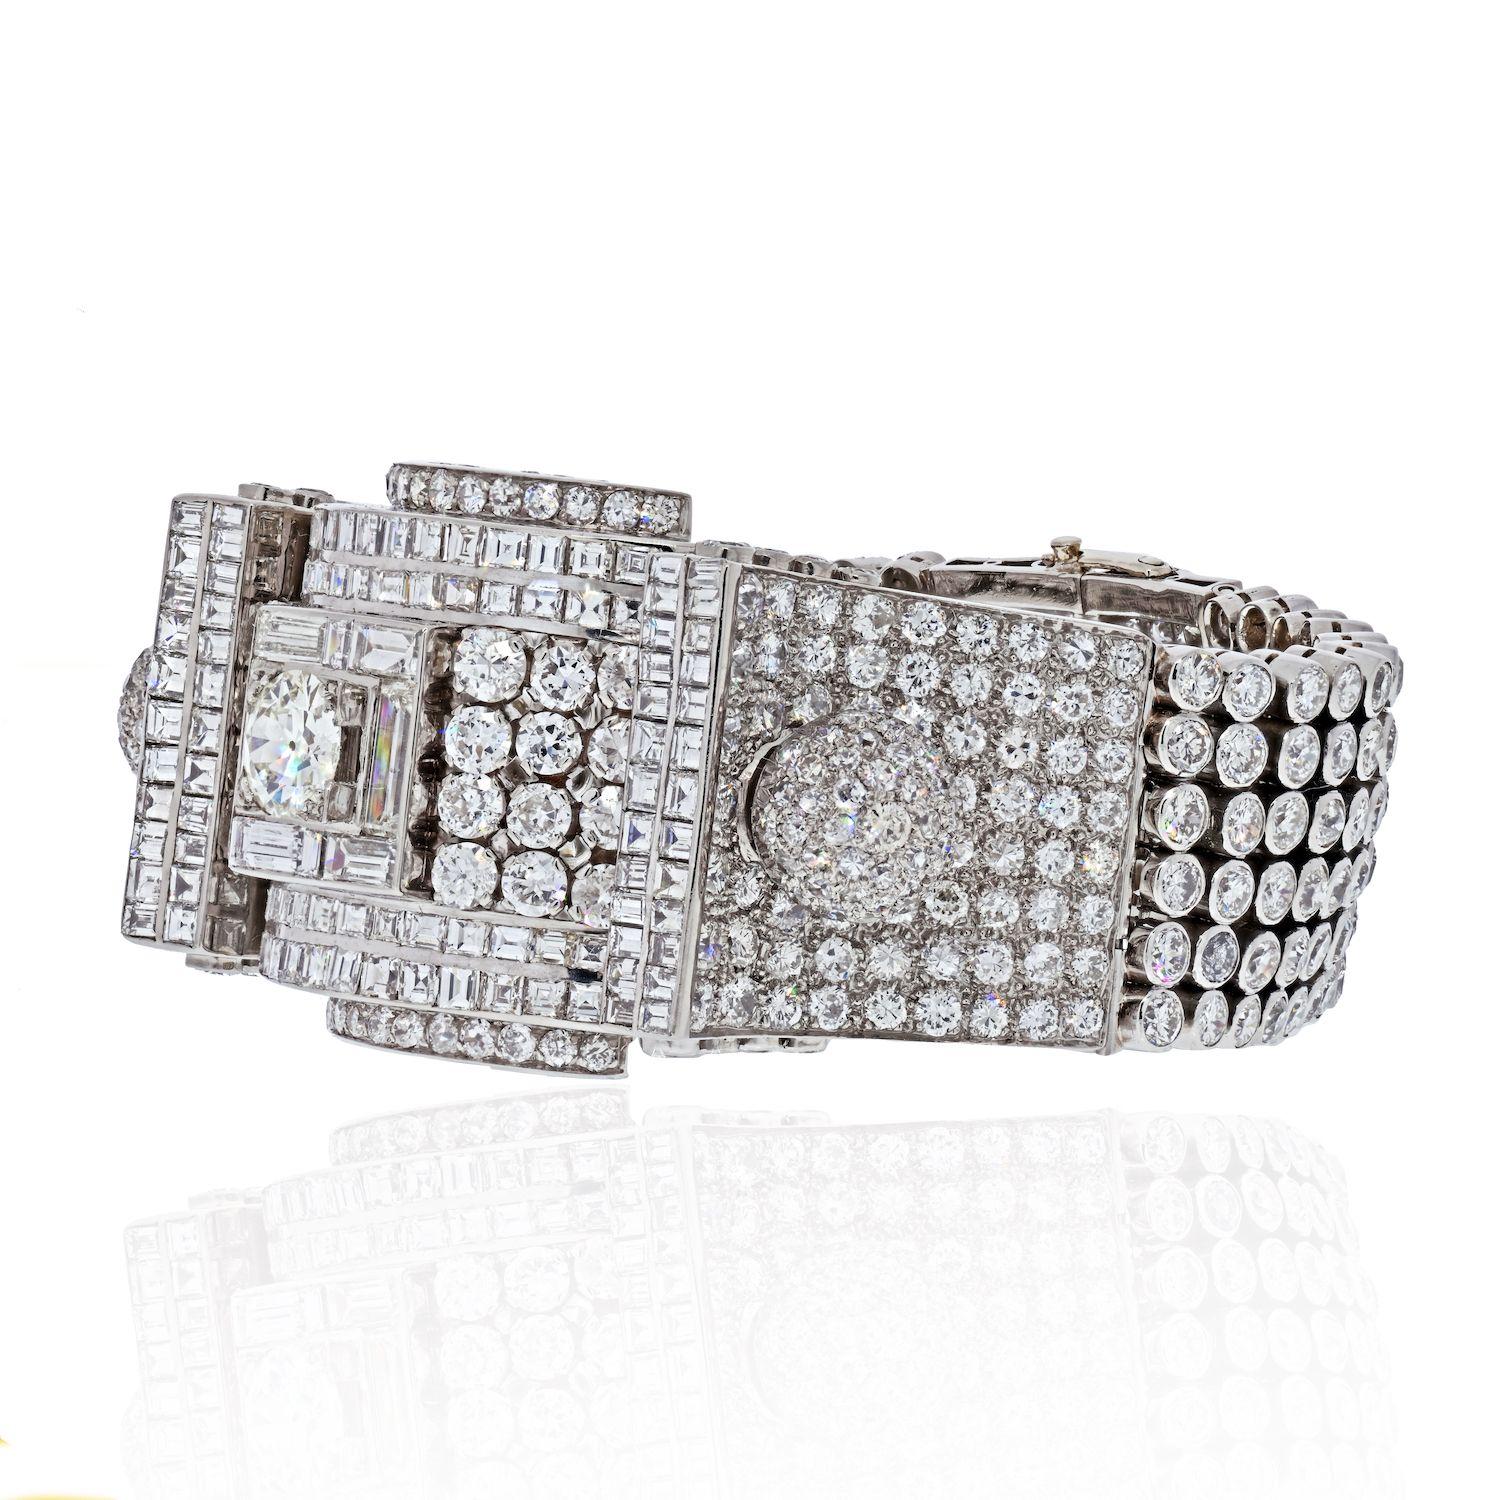 Very elaborate Platinum 1930's Art Deco 60 Carat Diamond Bracelet. Designed with impressive prong, bezel and channel solid openwork pattern set with old European cut diamond in the middle with diamond weight at approximately 60.00 carats. 
Center